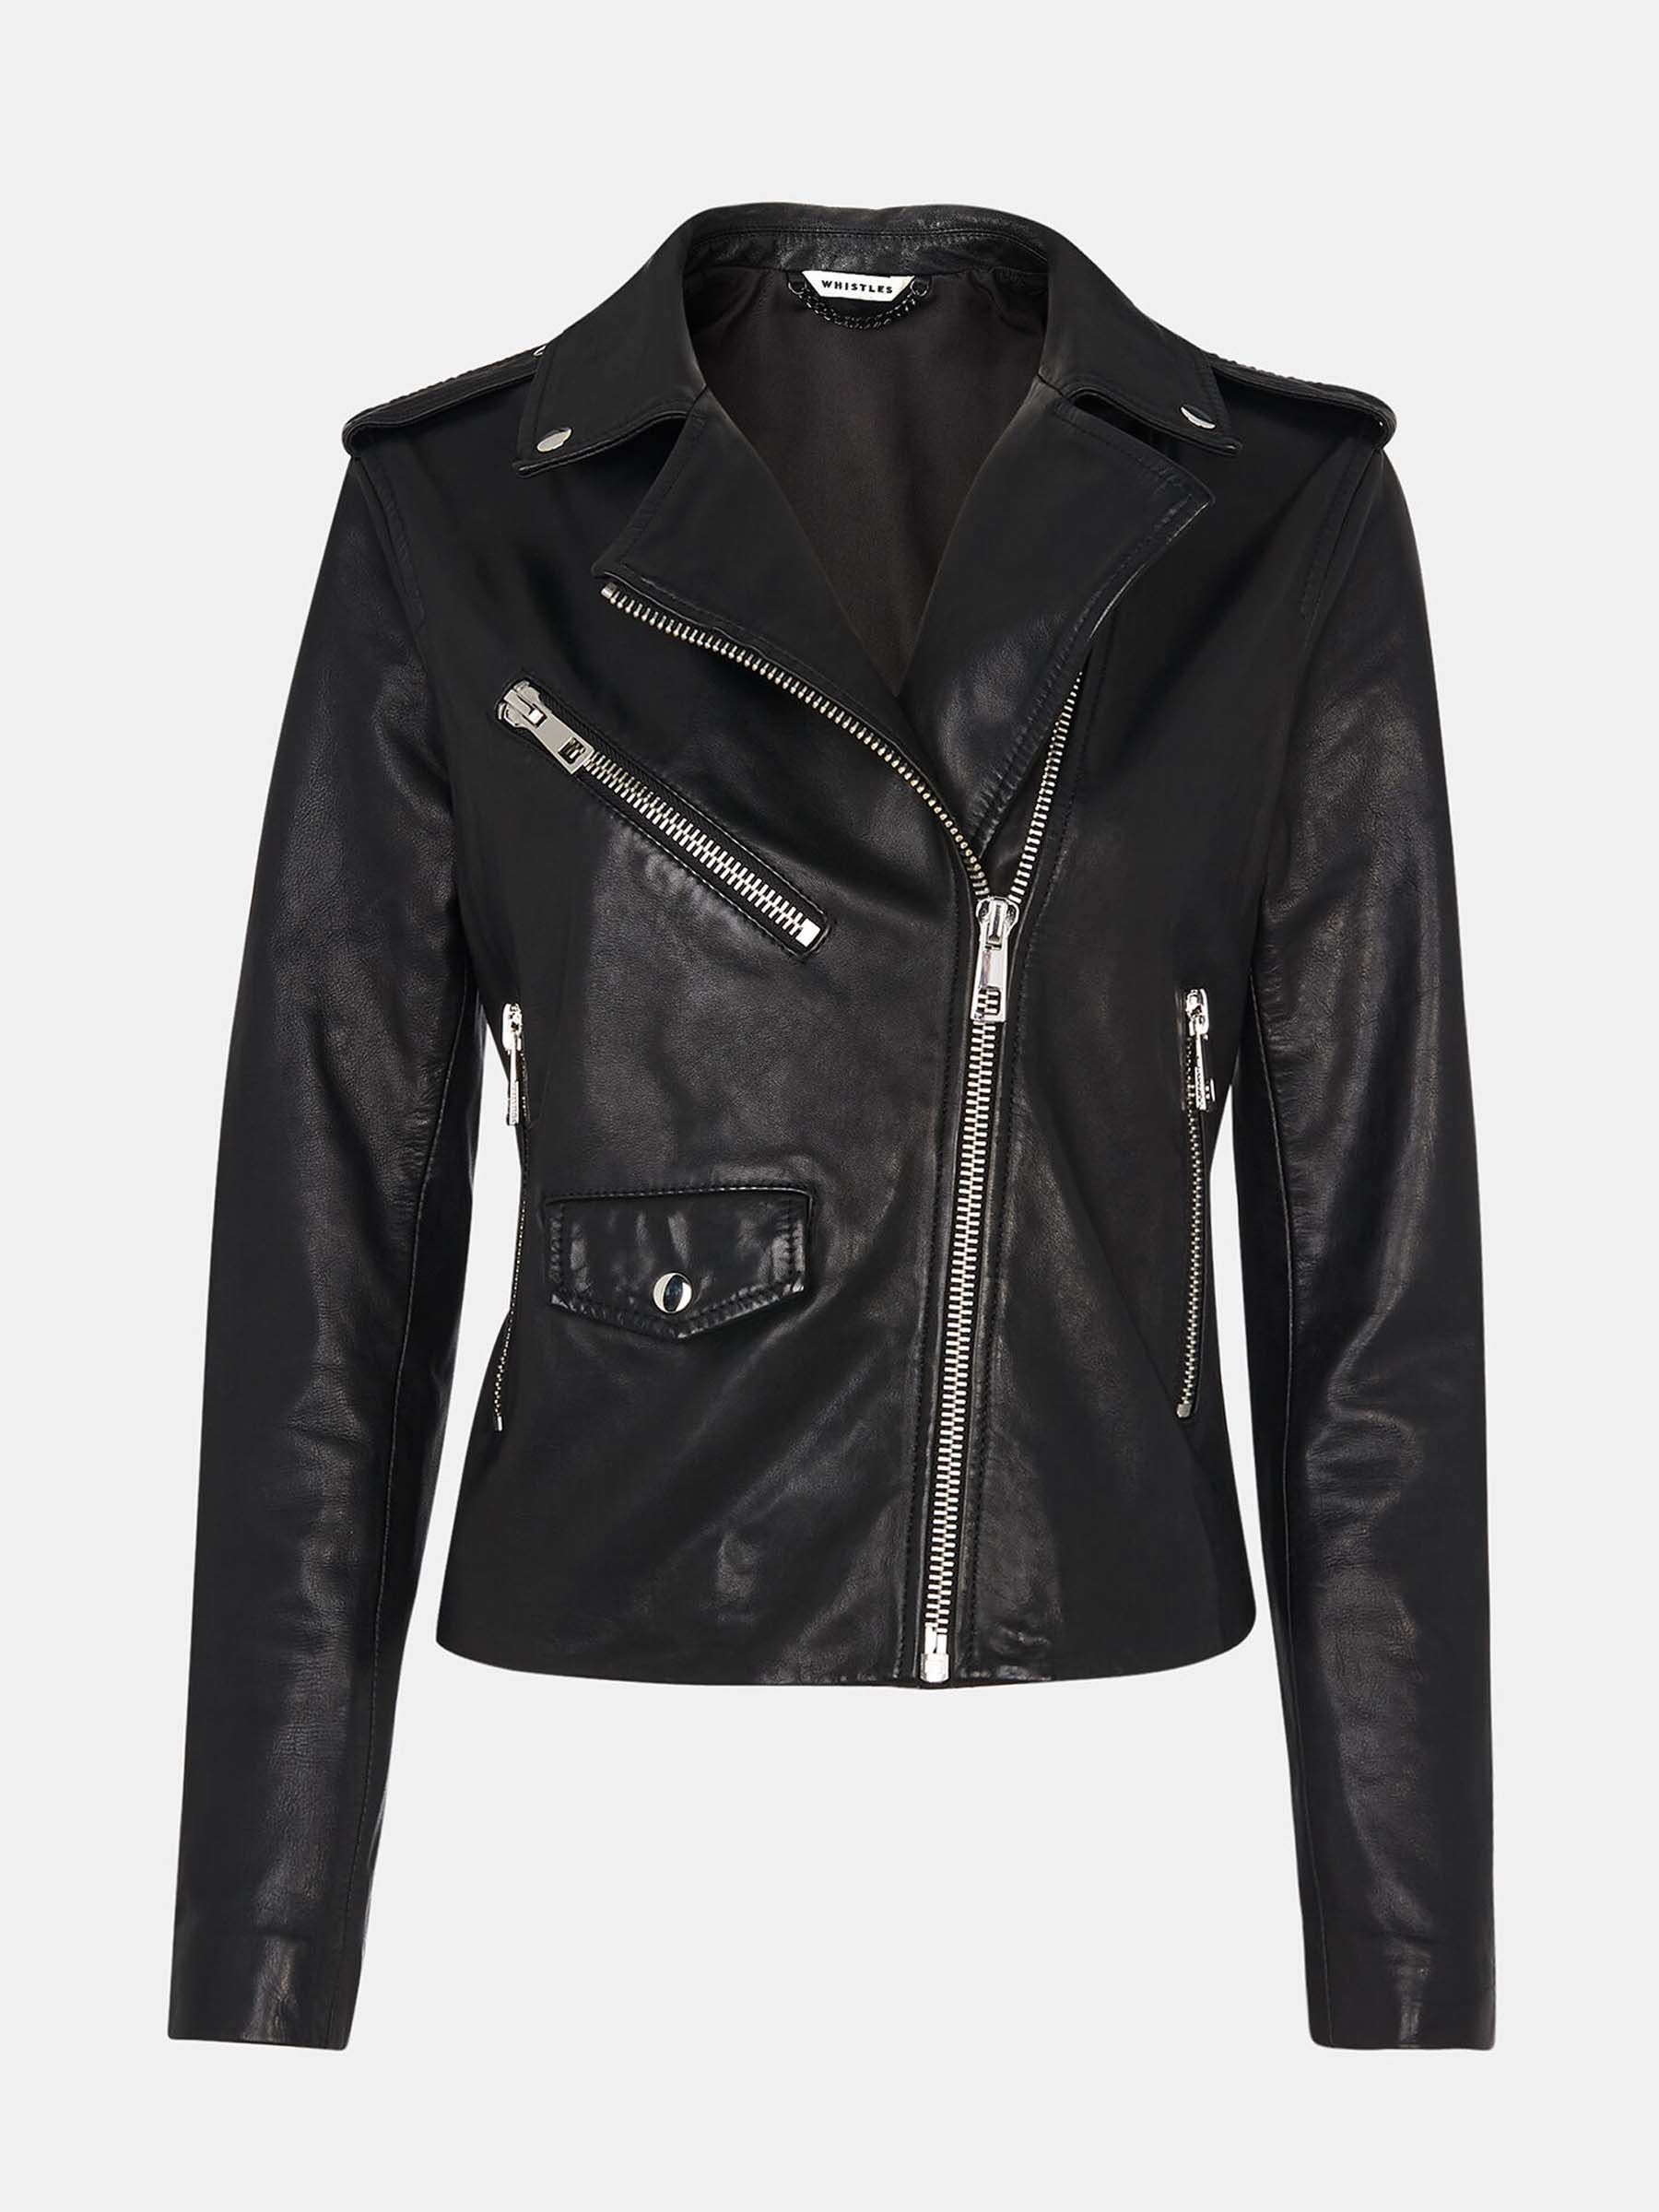 Cool leather jackets to buy now and wear forever